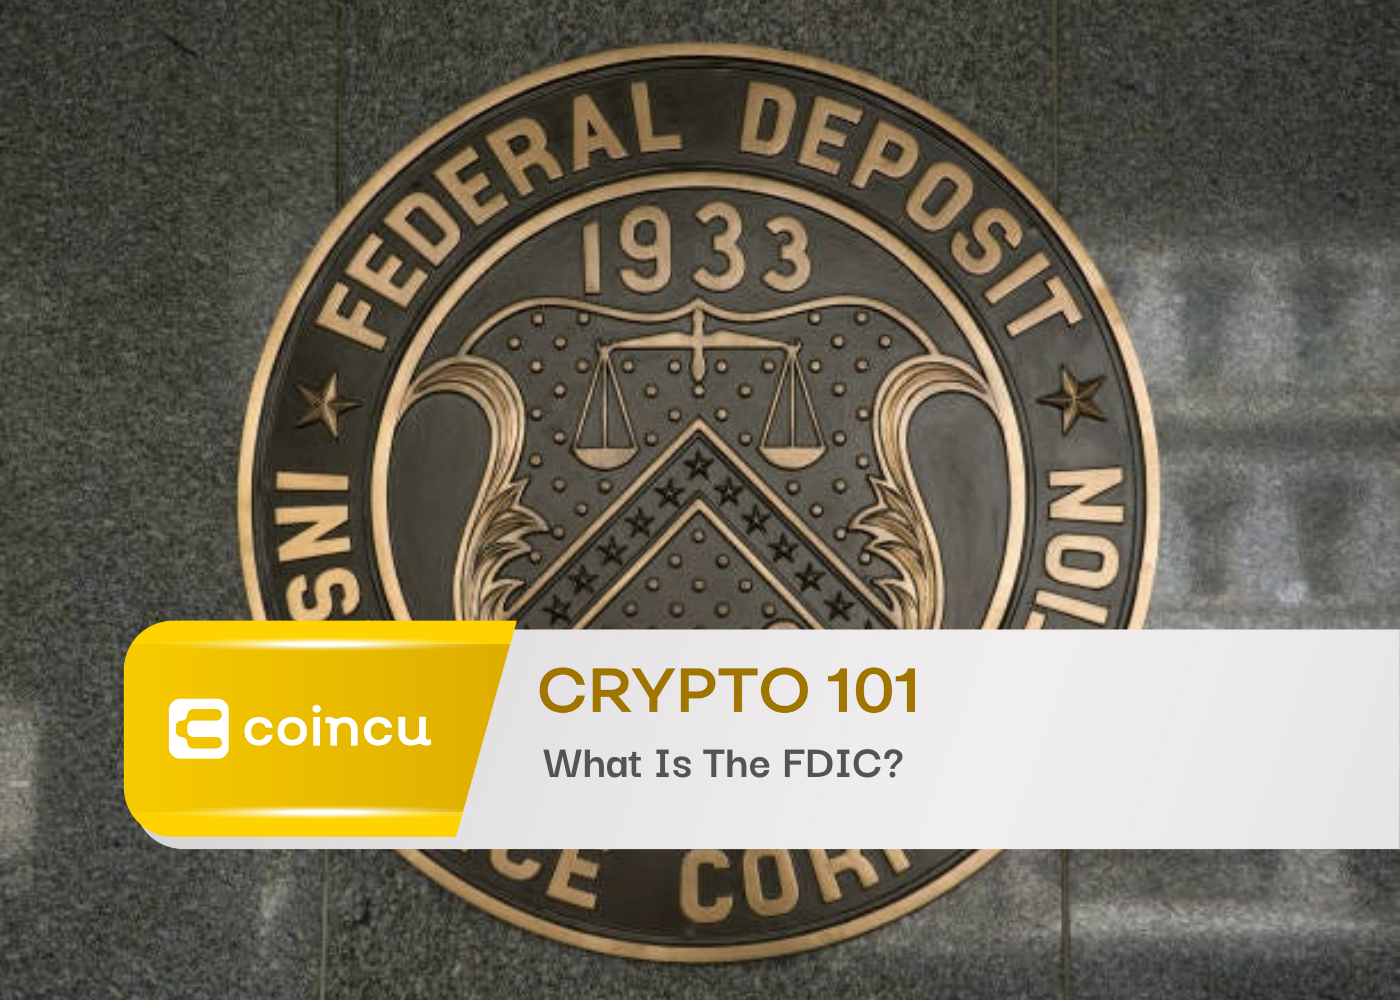 Crypto 101: What Is The FDIC?